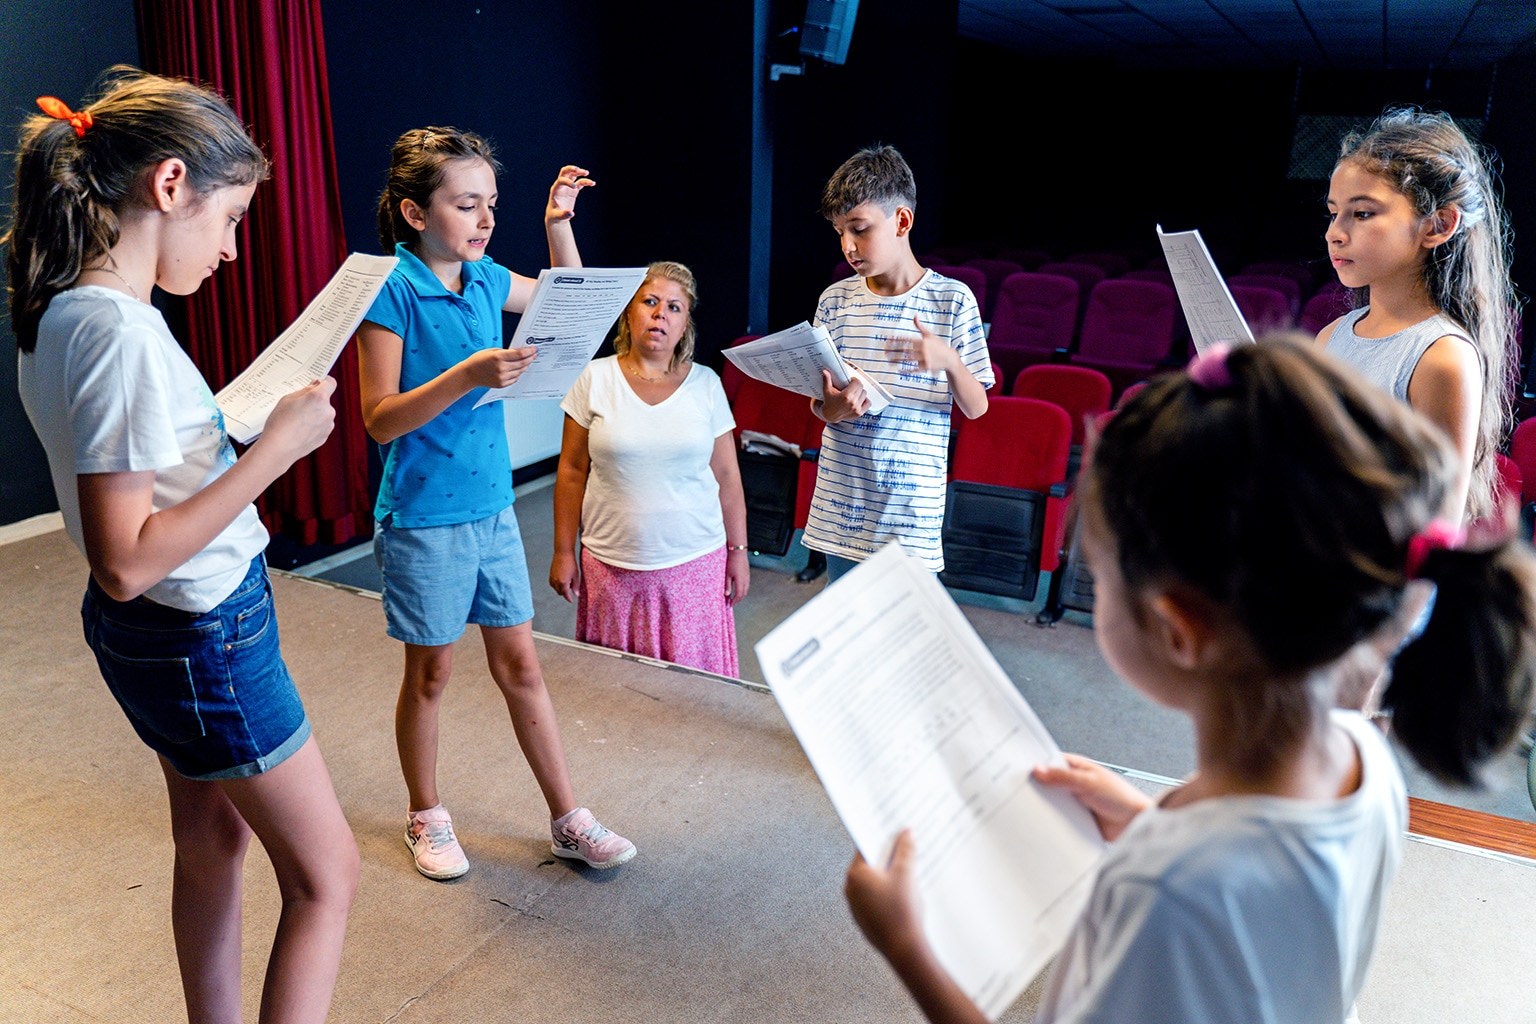 Group of children reading scripts on a stage while their drama teacher looks on.